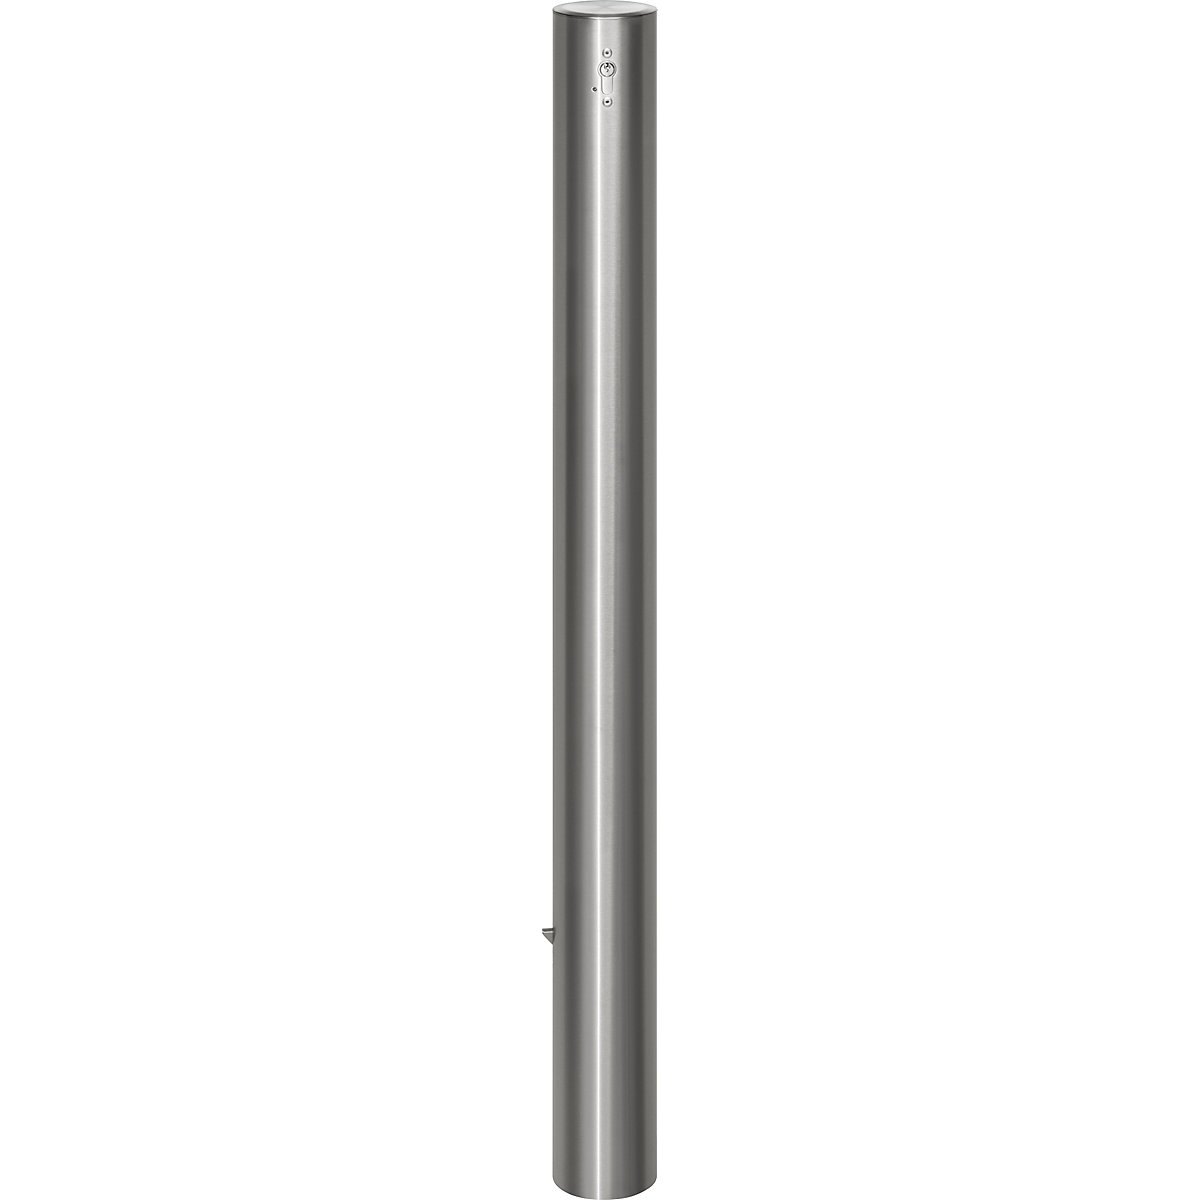 Stainless steel barrier post, with flat head, ground sleeve for concreting in, Ø 102 mm, profile cylinder-5